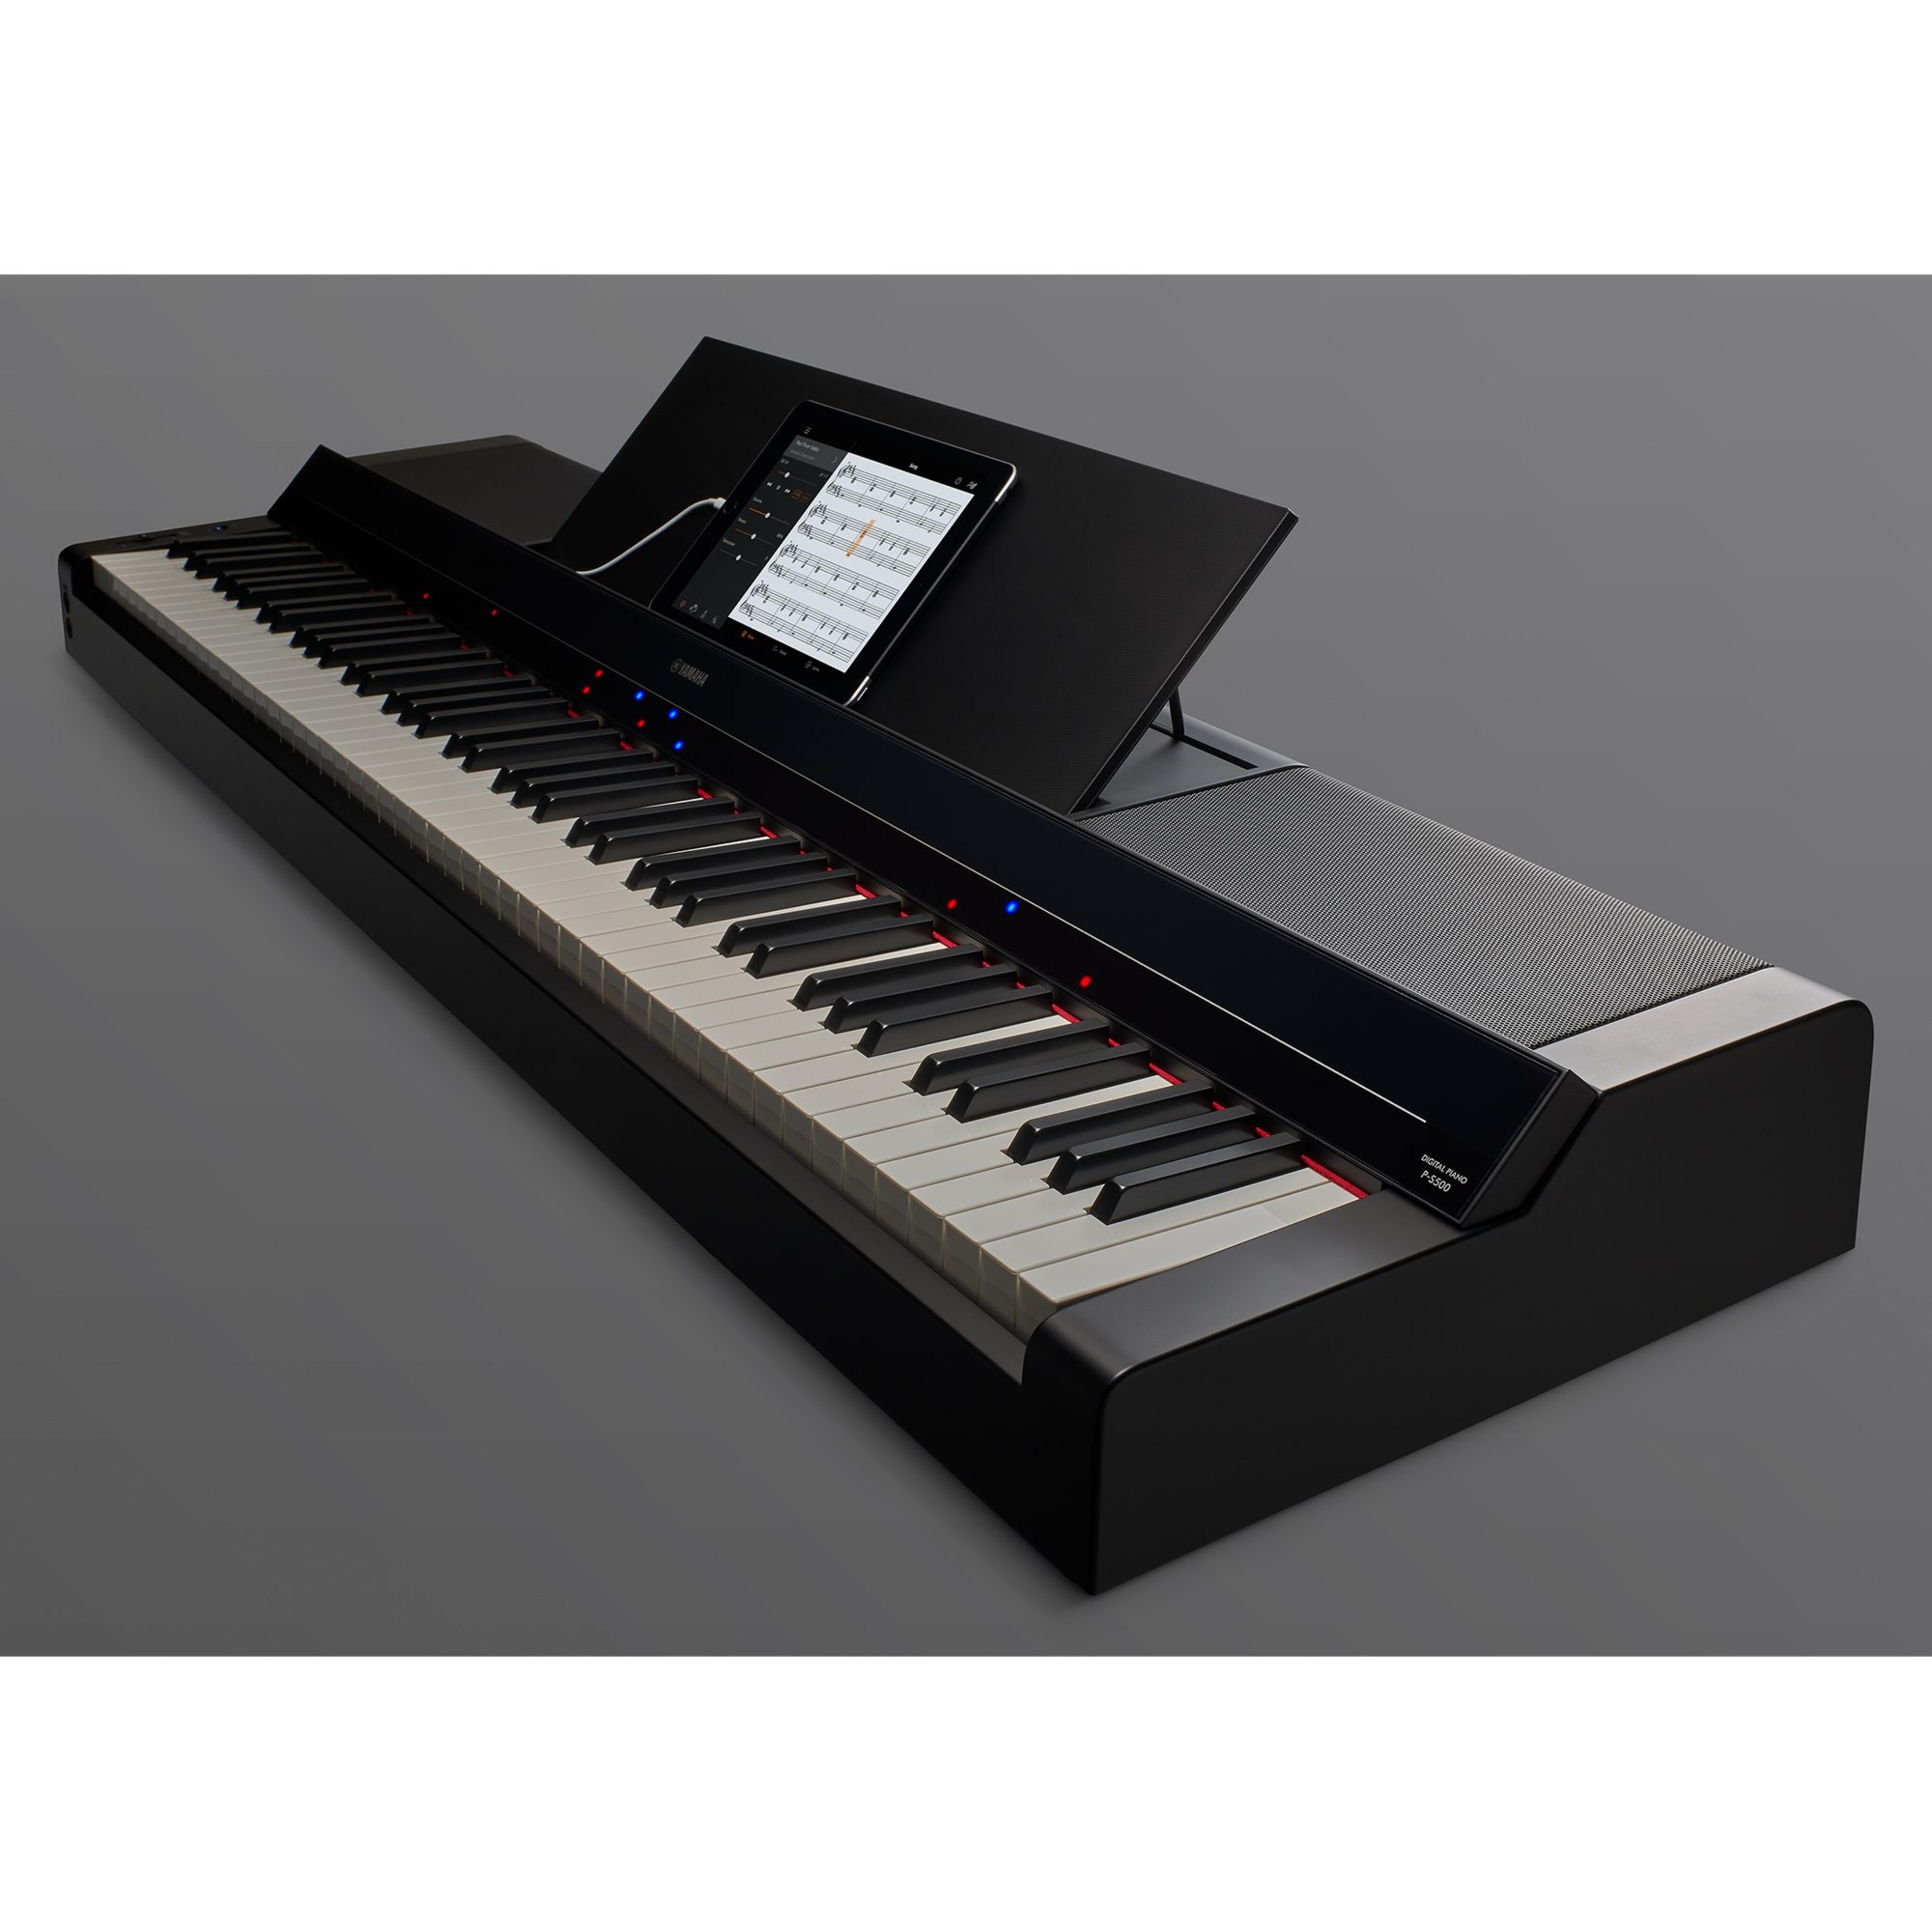 P-145 - Overview - P Series - Pianos - Musical Instruments - Products -  Yamaha - Other European Countries